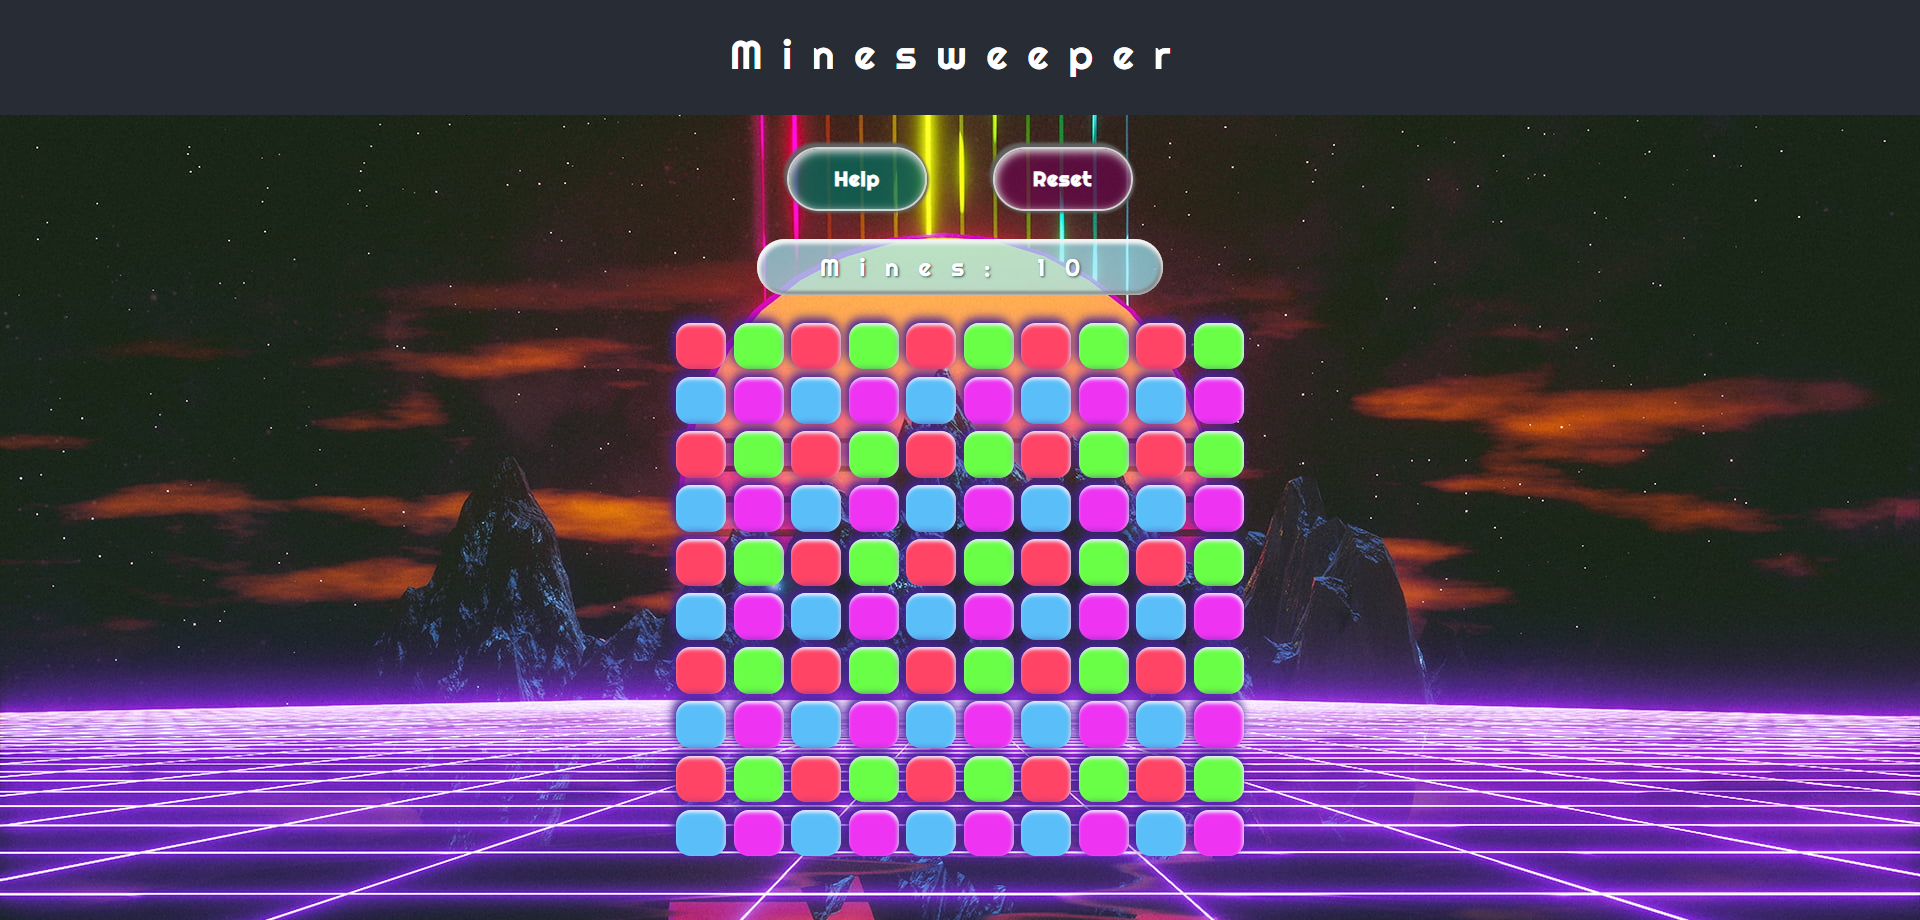 minesweeper_game